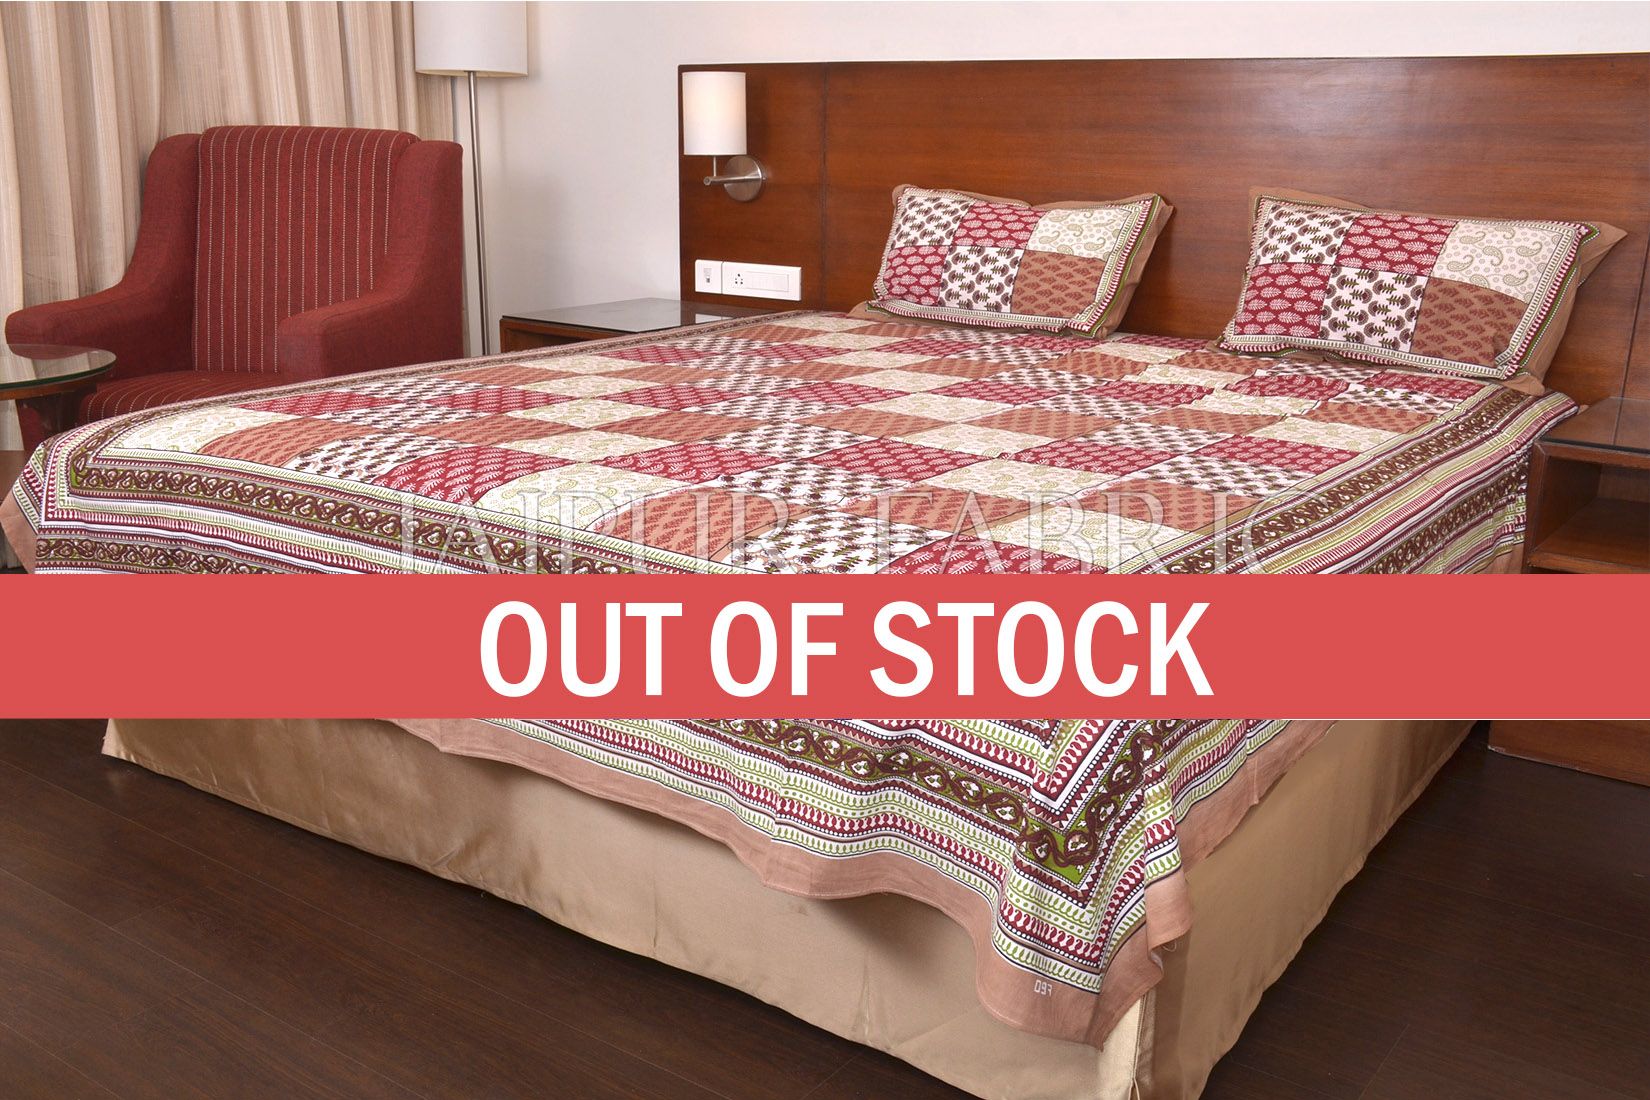 Brown Tropical Print Double Bed Sheet